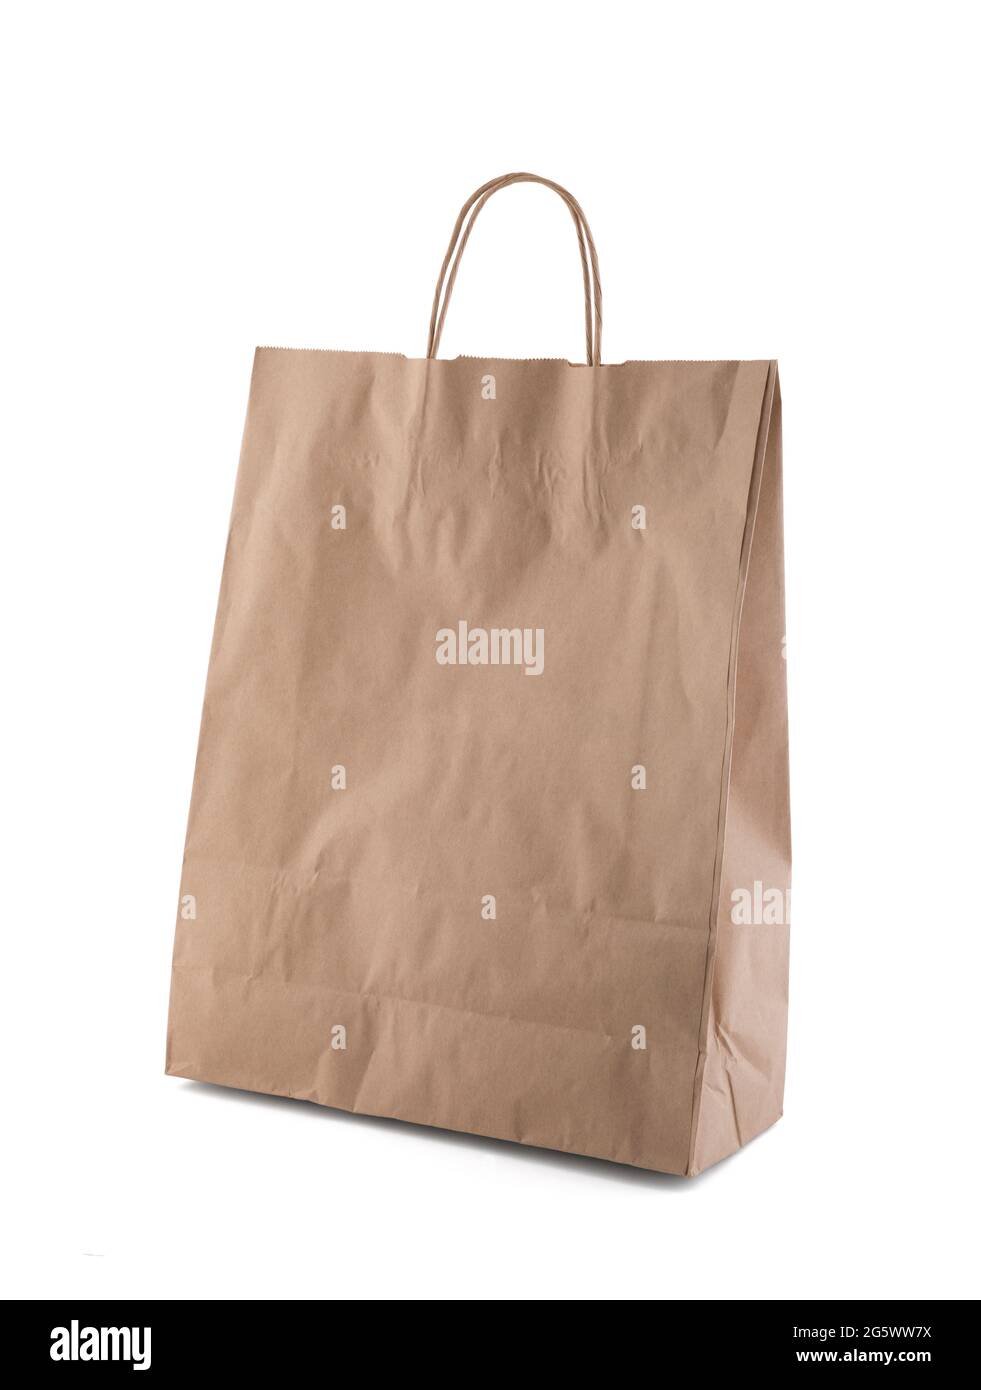 Shopping recycled brown paper bag isolated on white background with clipping path Stock Photo